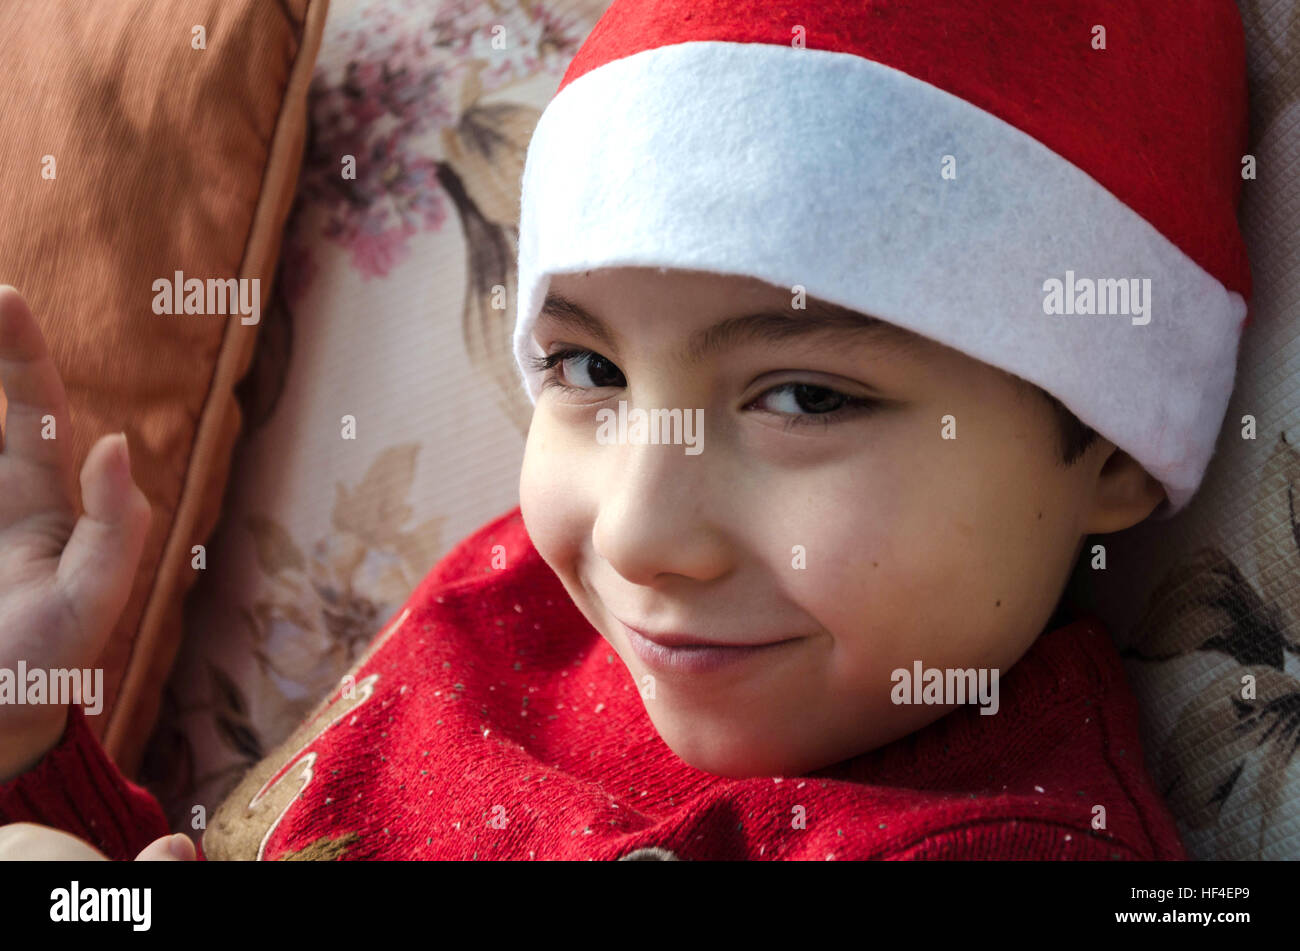 A portrait of a young boy wearing a Father Christmas hat. Stock Photo